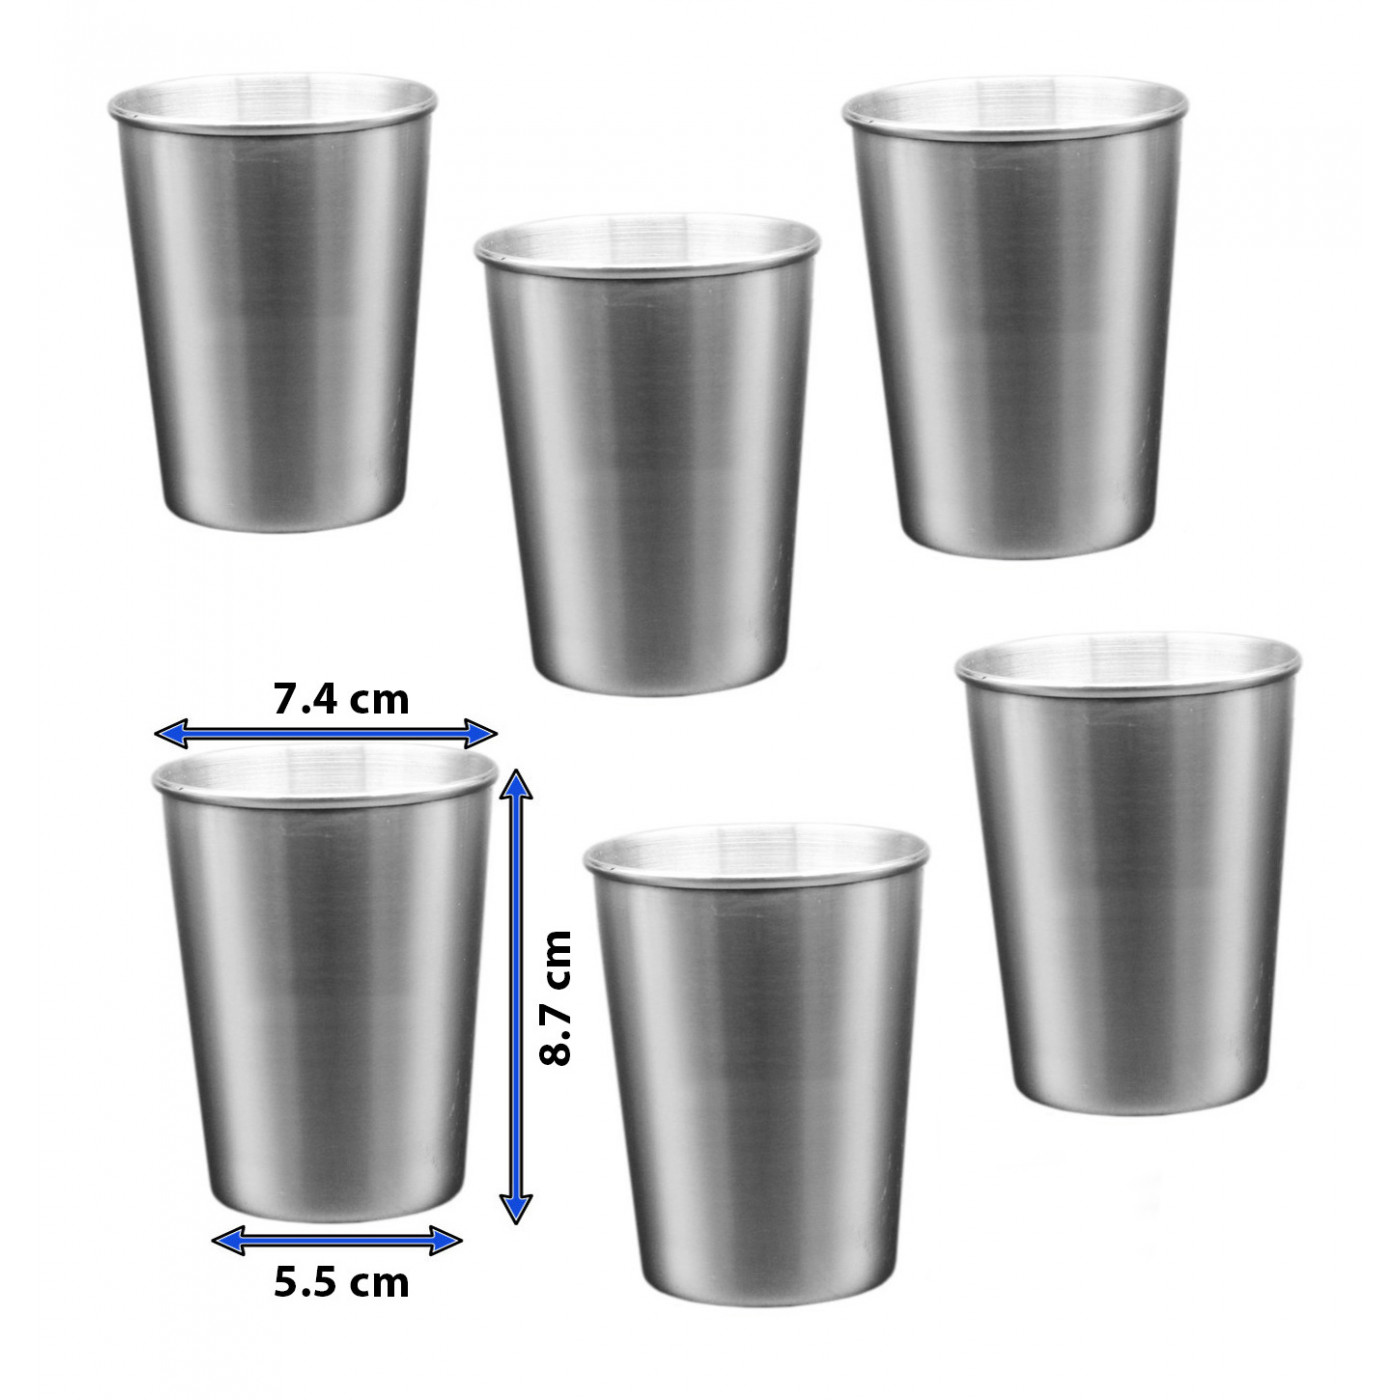 https://www.woodtoolsanddeco.com/10898-large_default/set-of-6-stainless-steel-cups-230-ml-with-rolled-edge.jpg